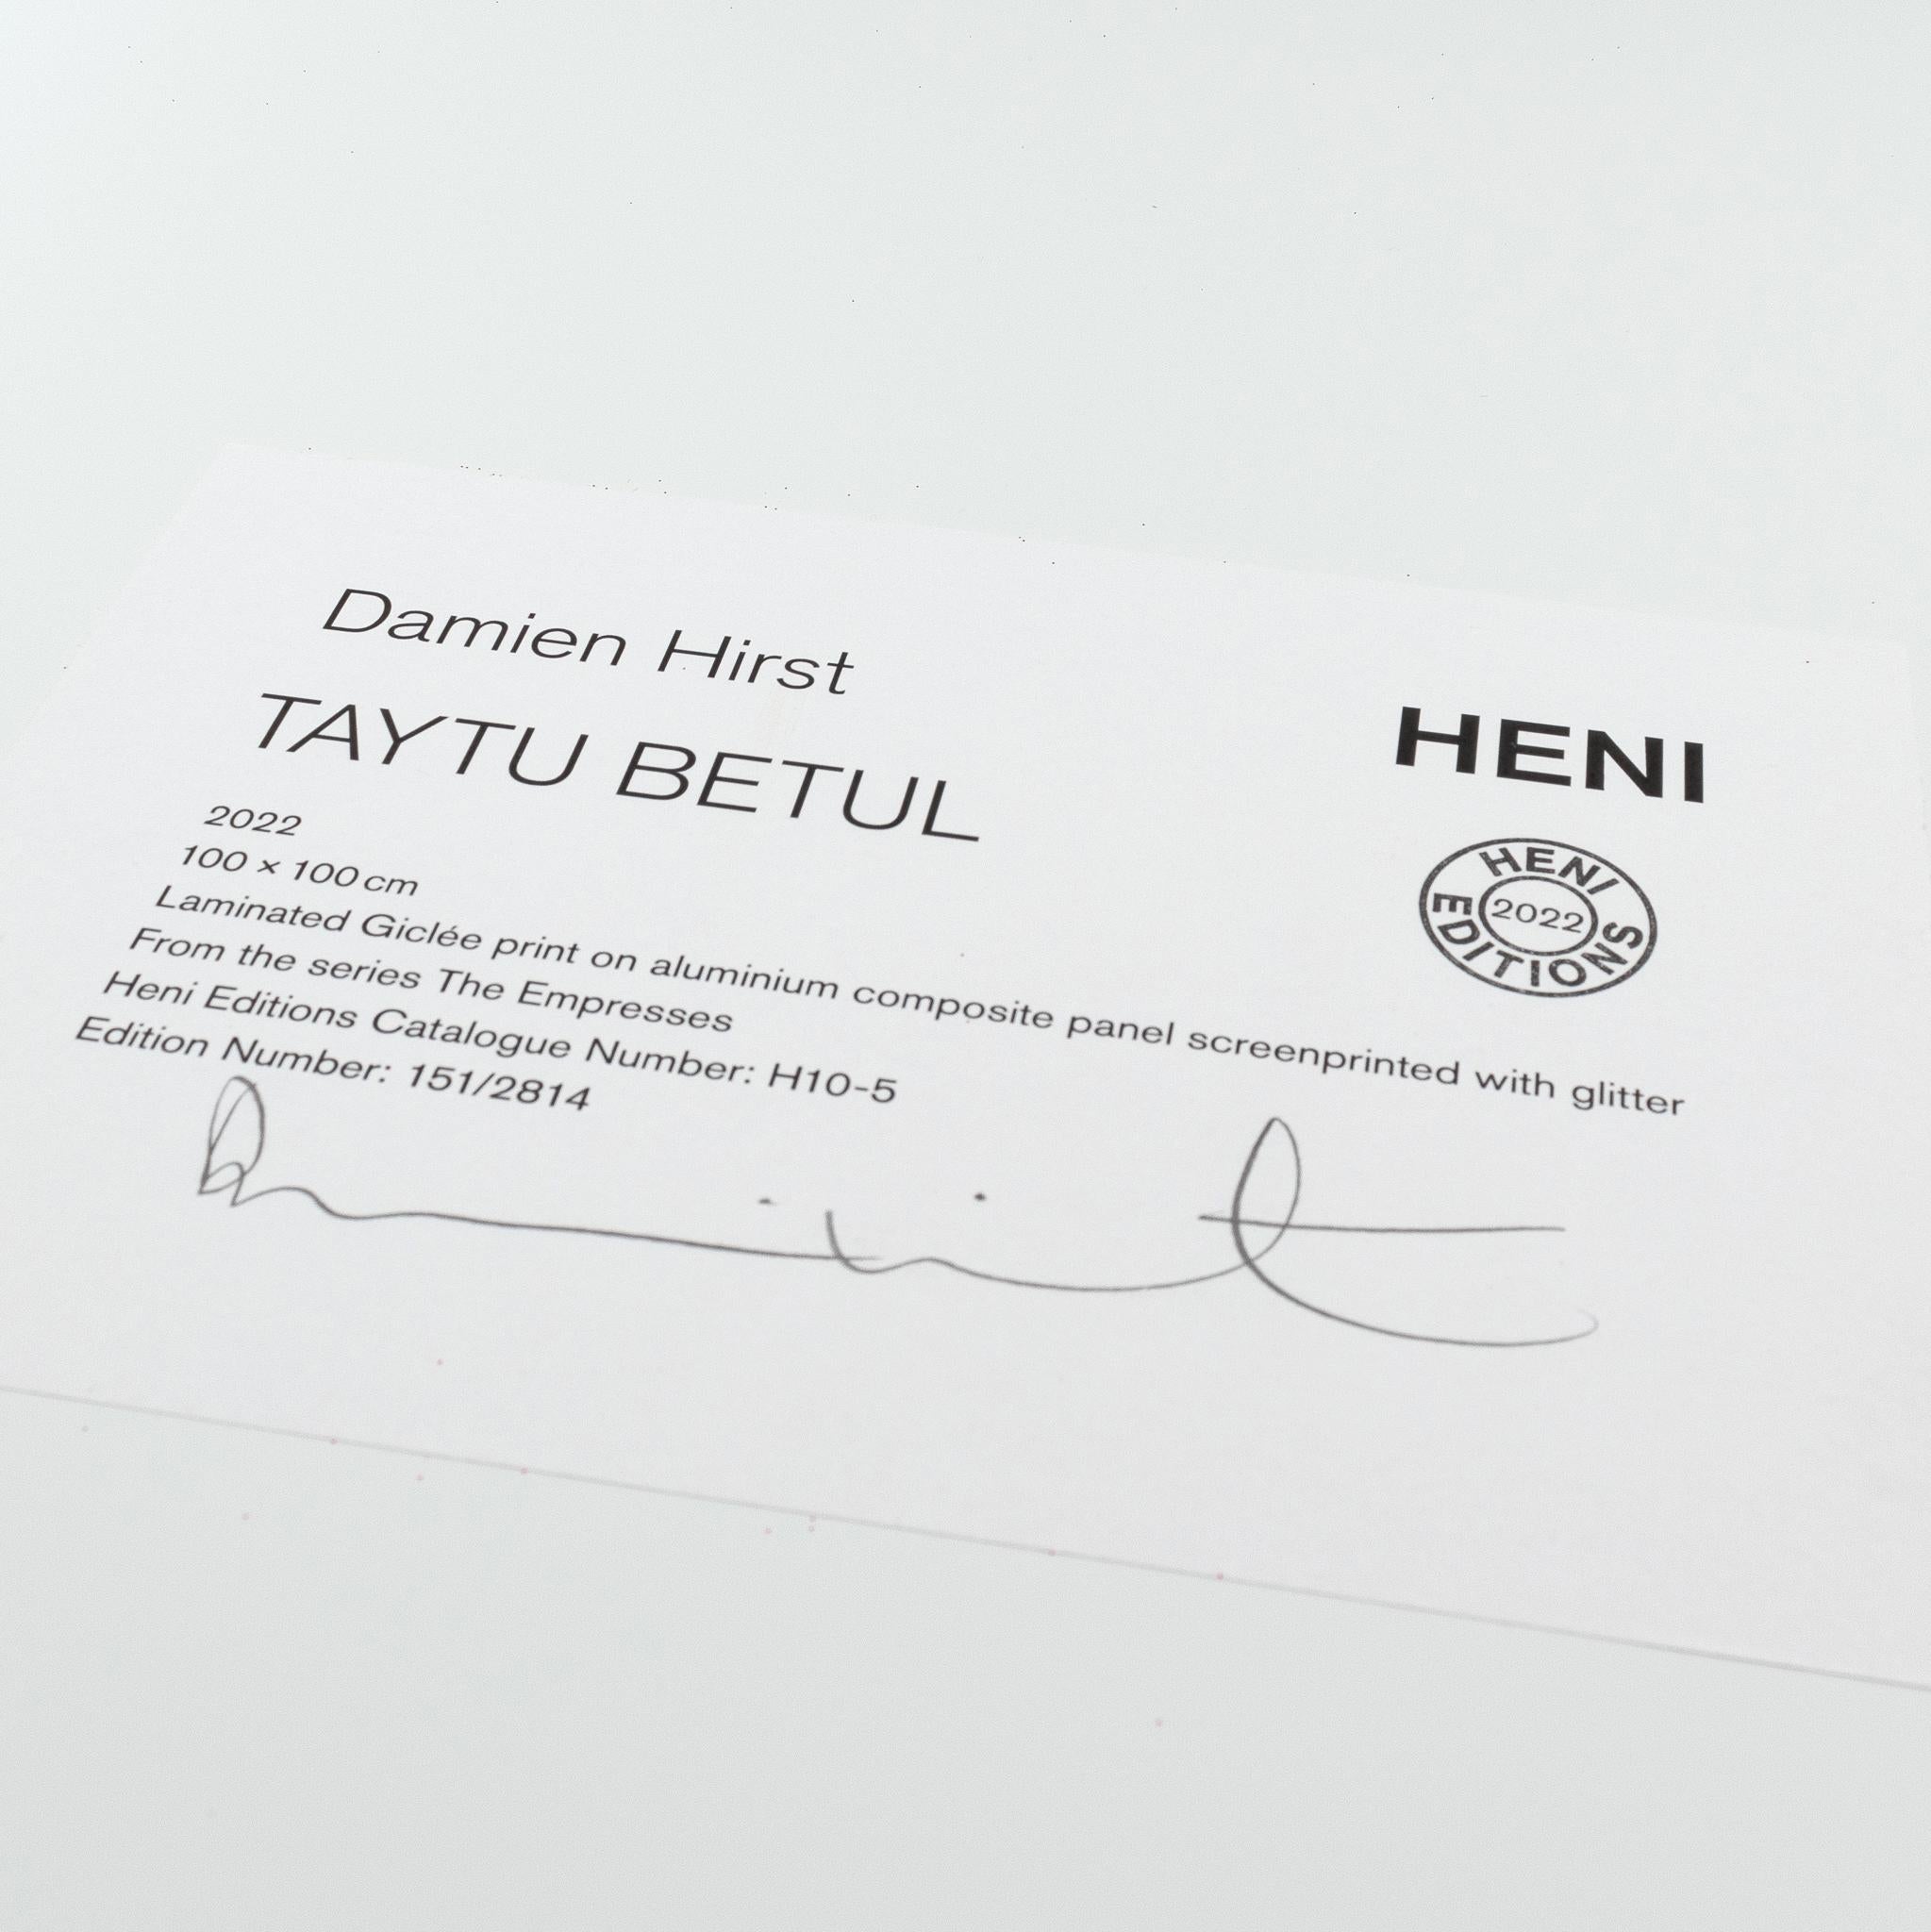 H10-5 Taytu Betul (from the Empresses) - Contemporary Print by Damien Hirst